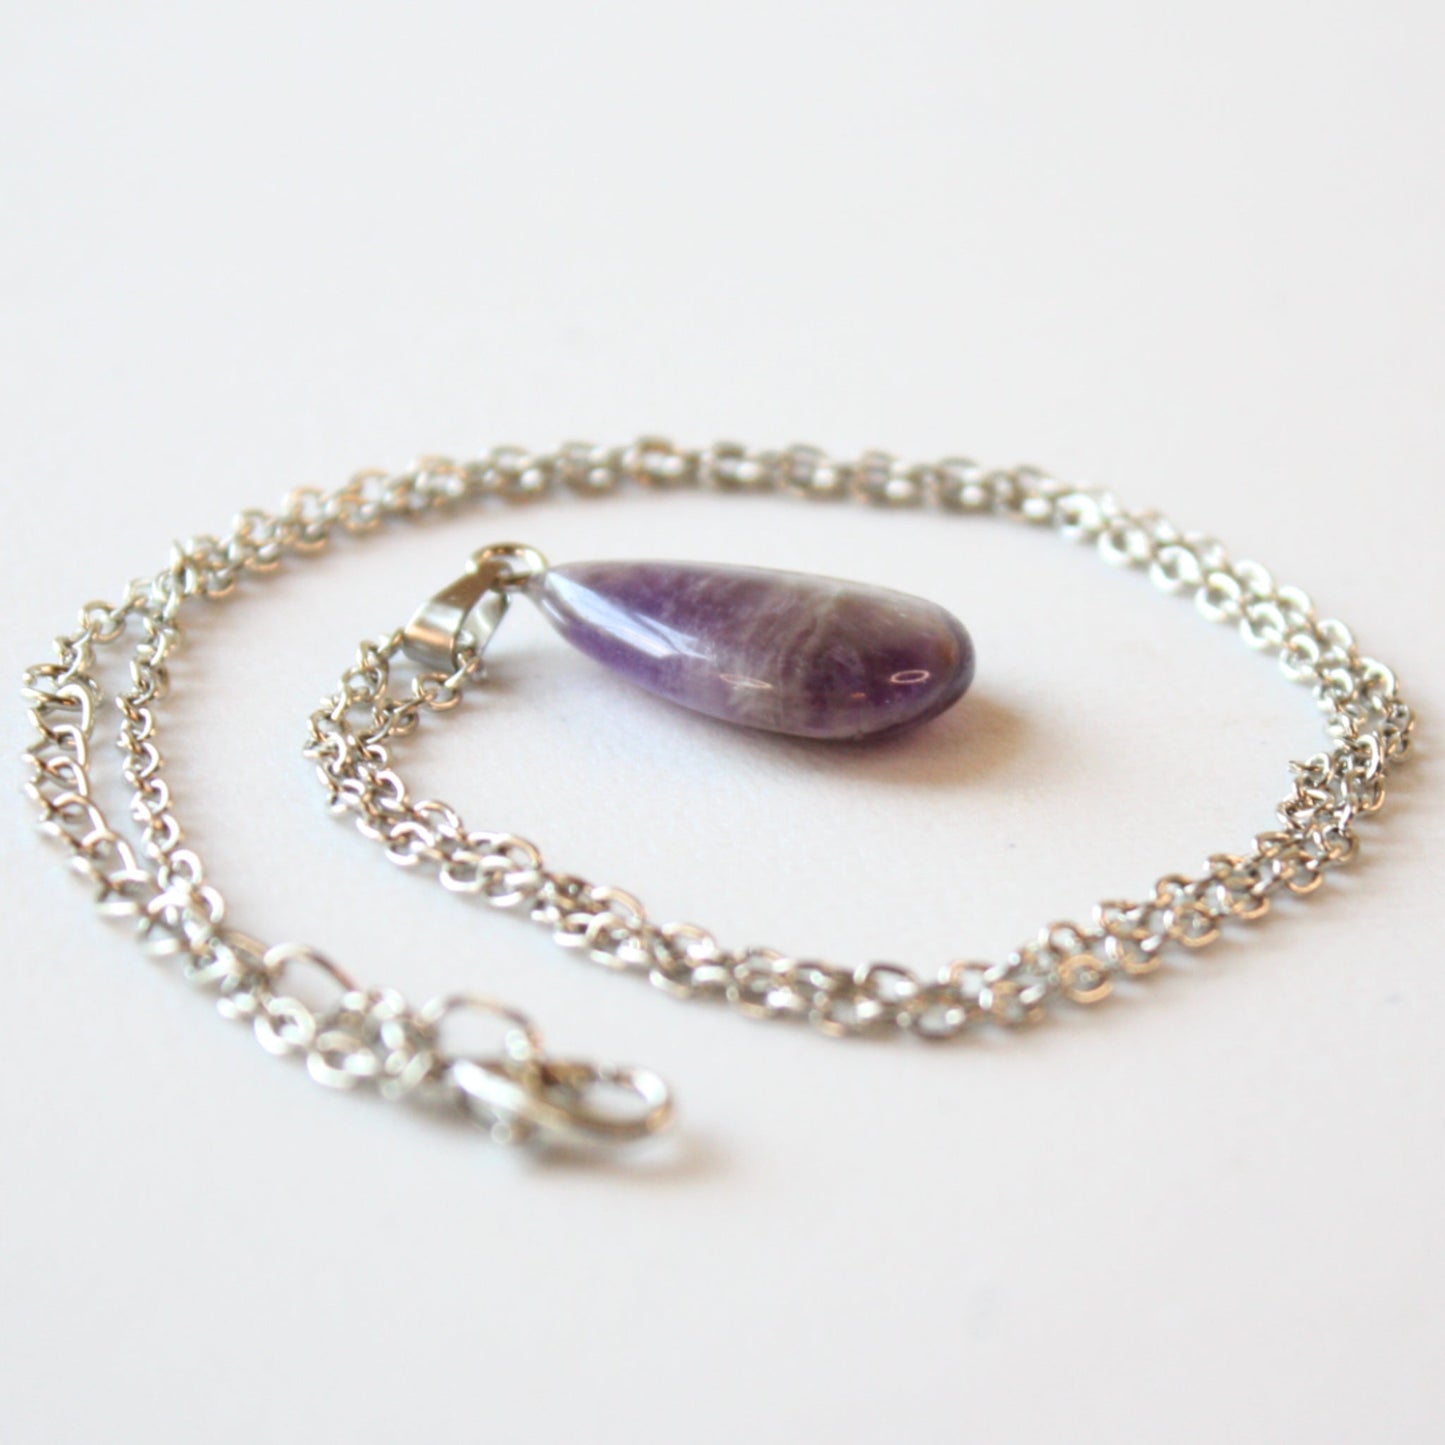 Amethyst Drop Pendant Crystal Necklace - Made in the USA